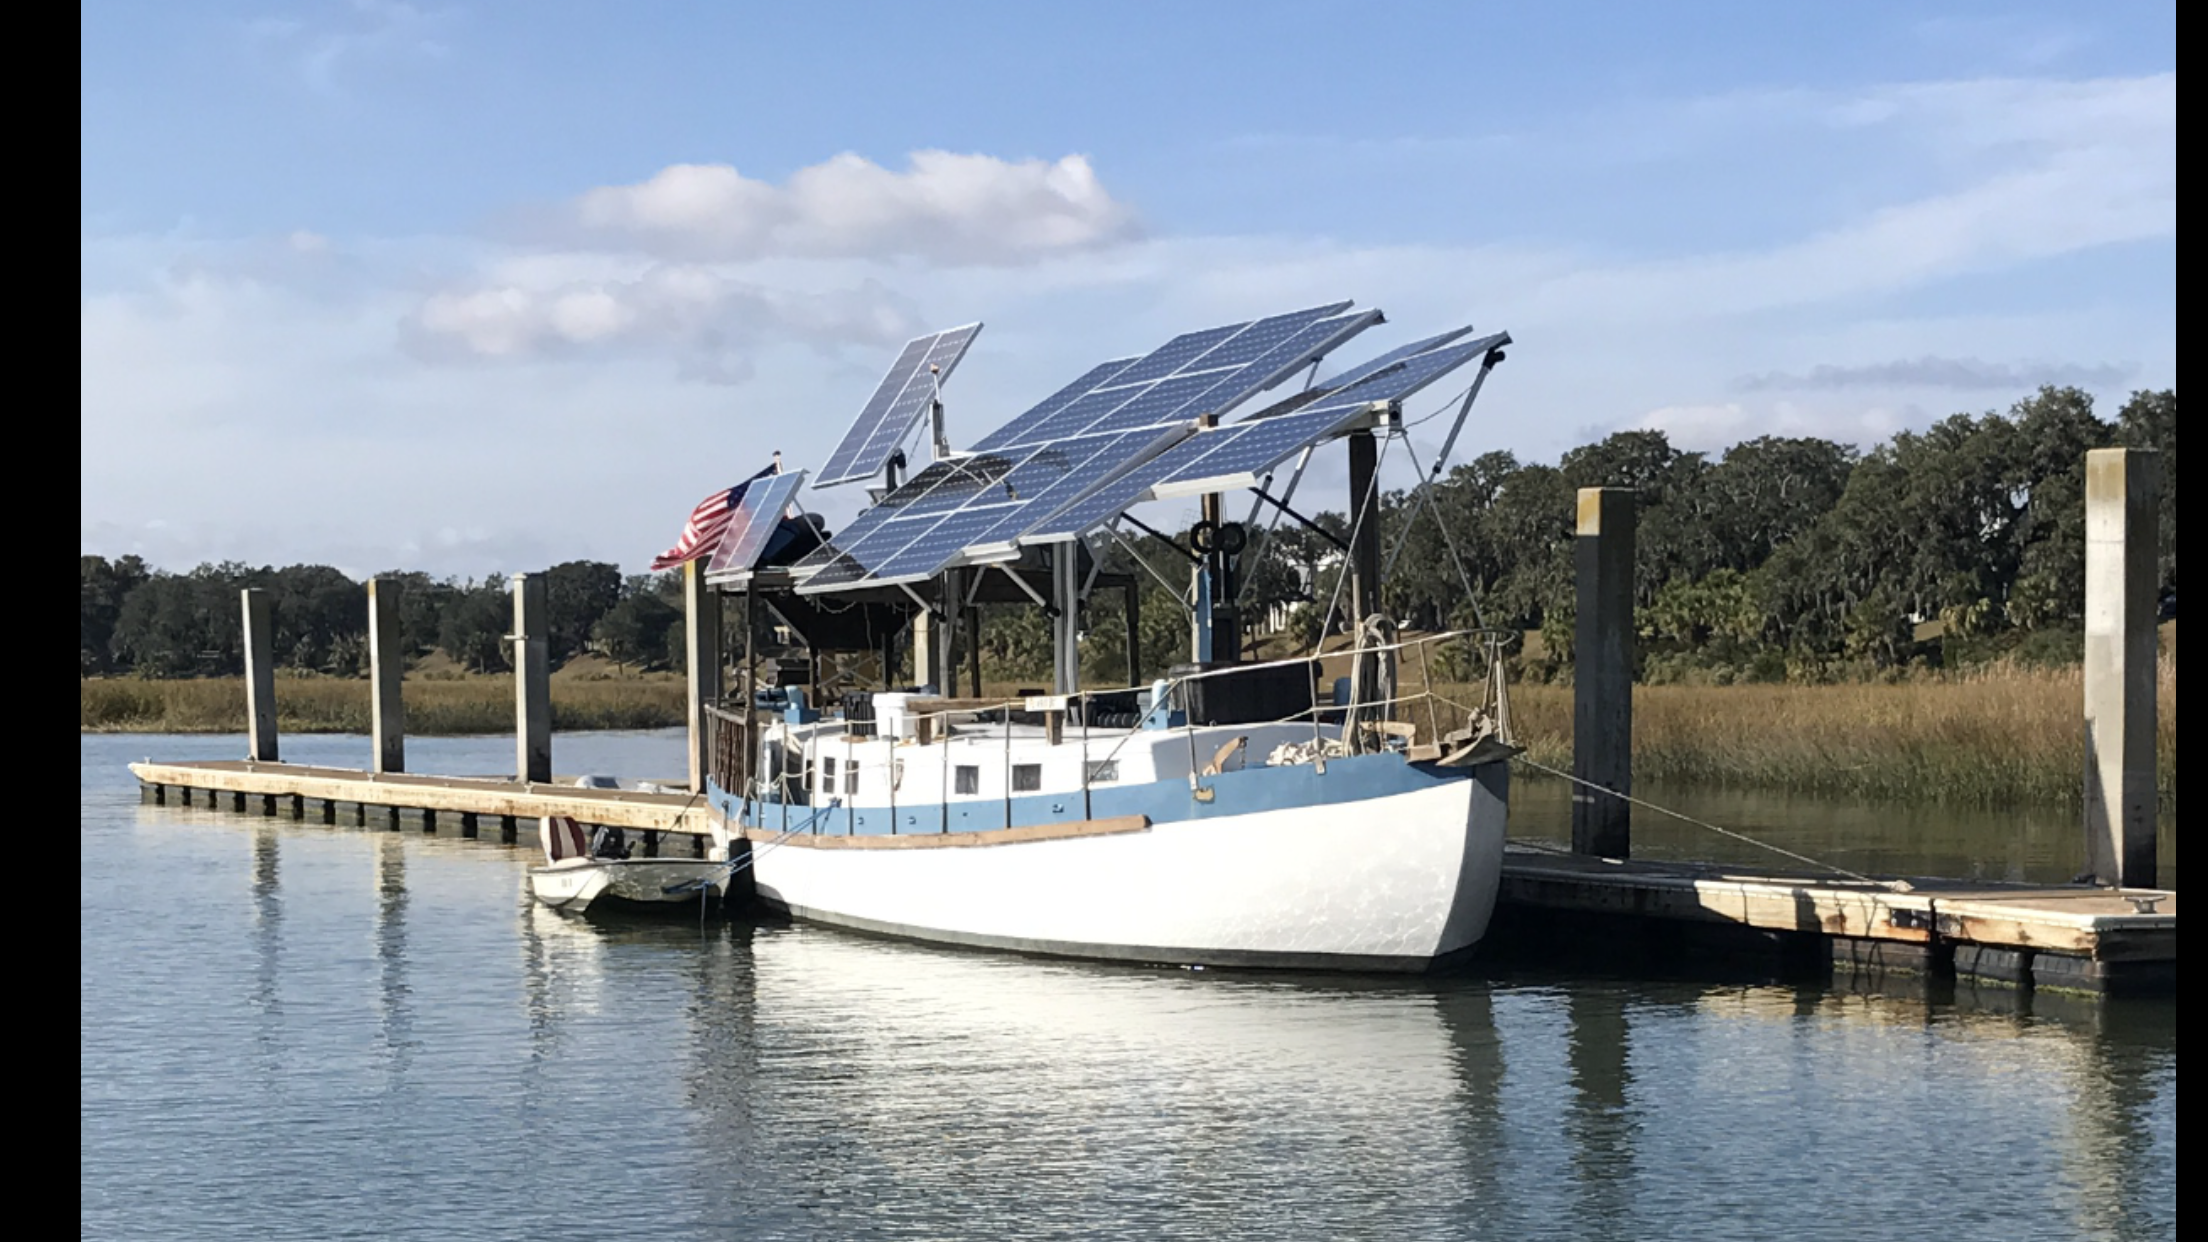 A converted sailboat with lots of solar panels.